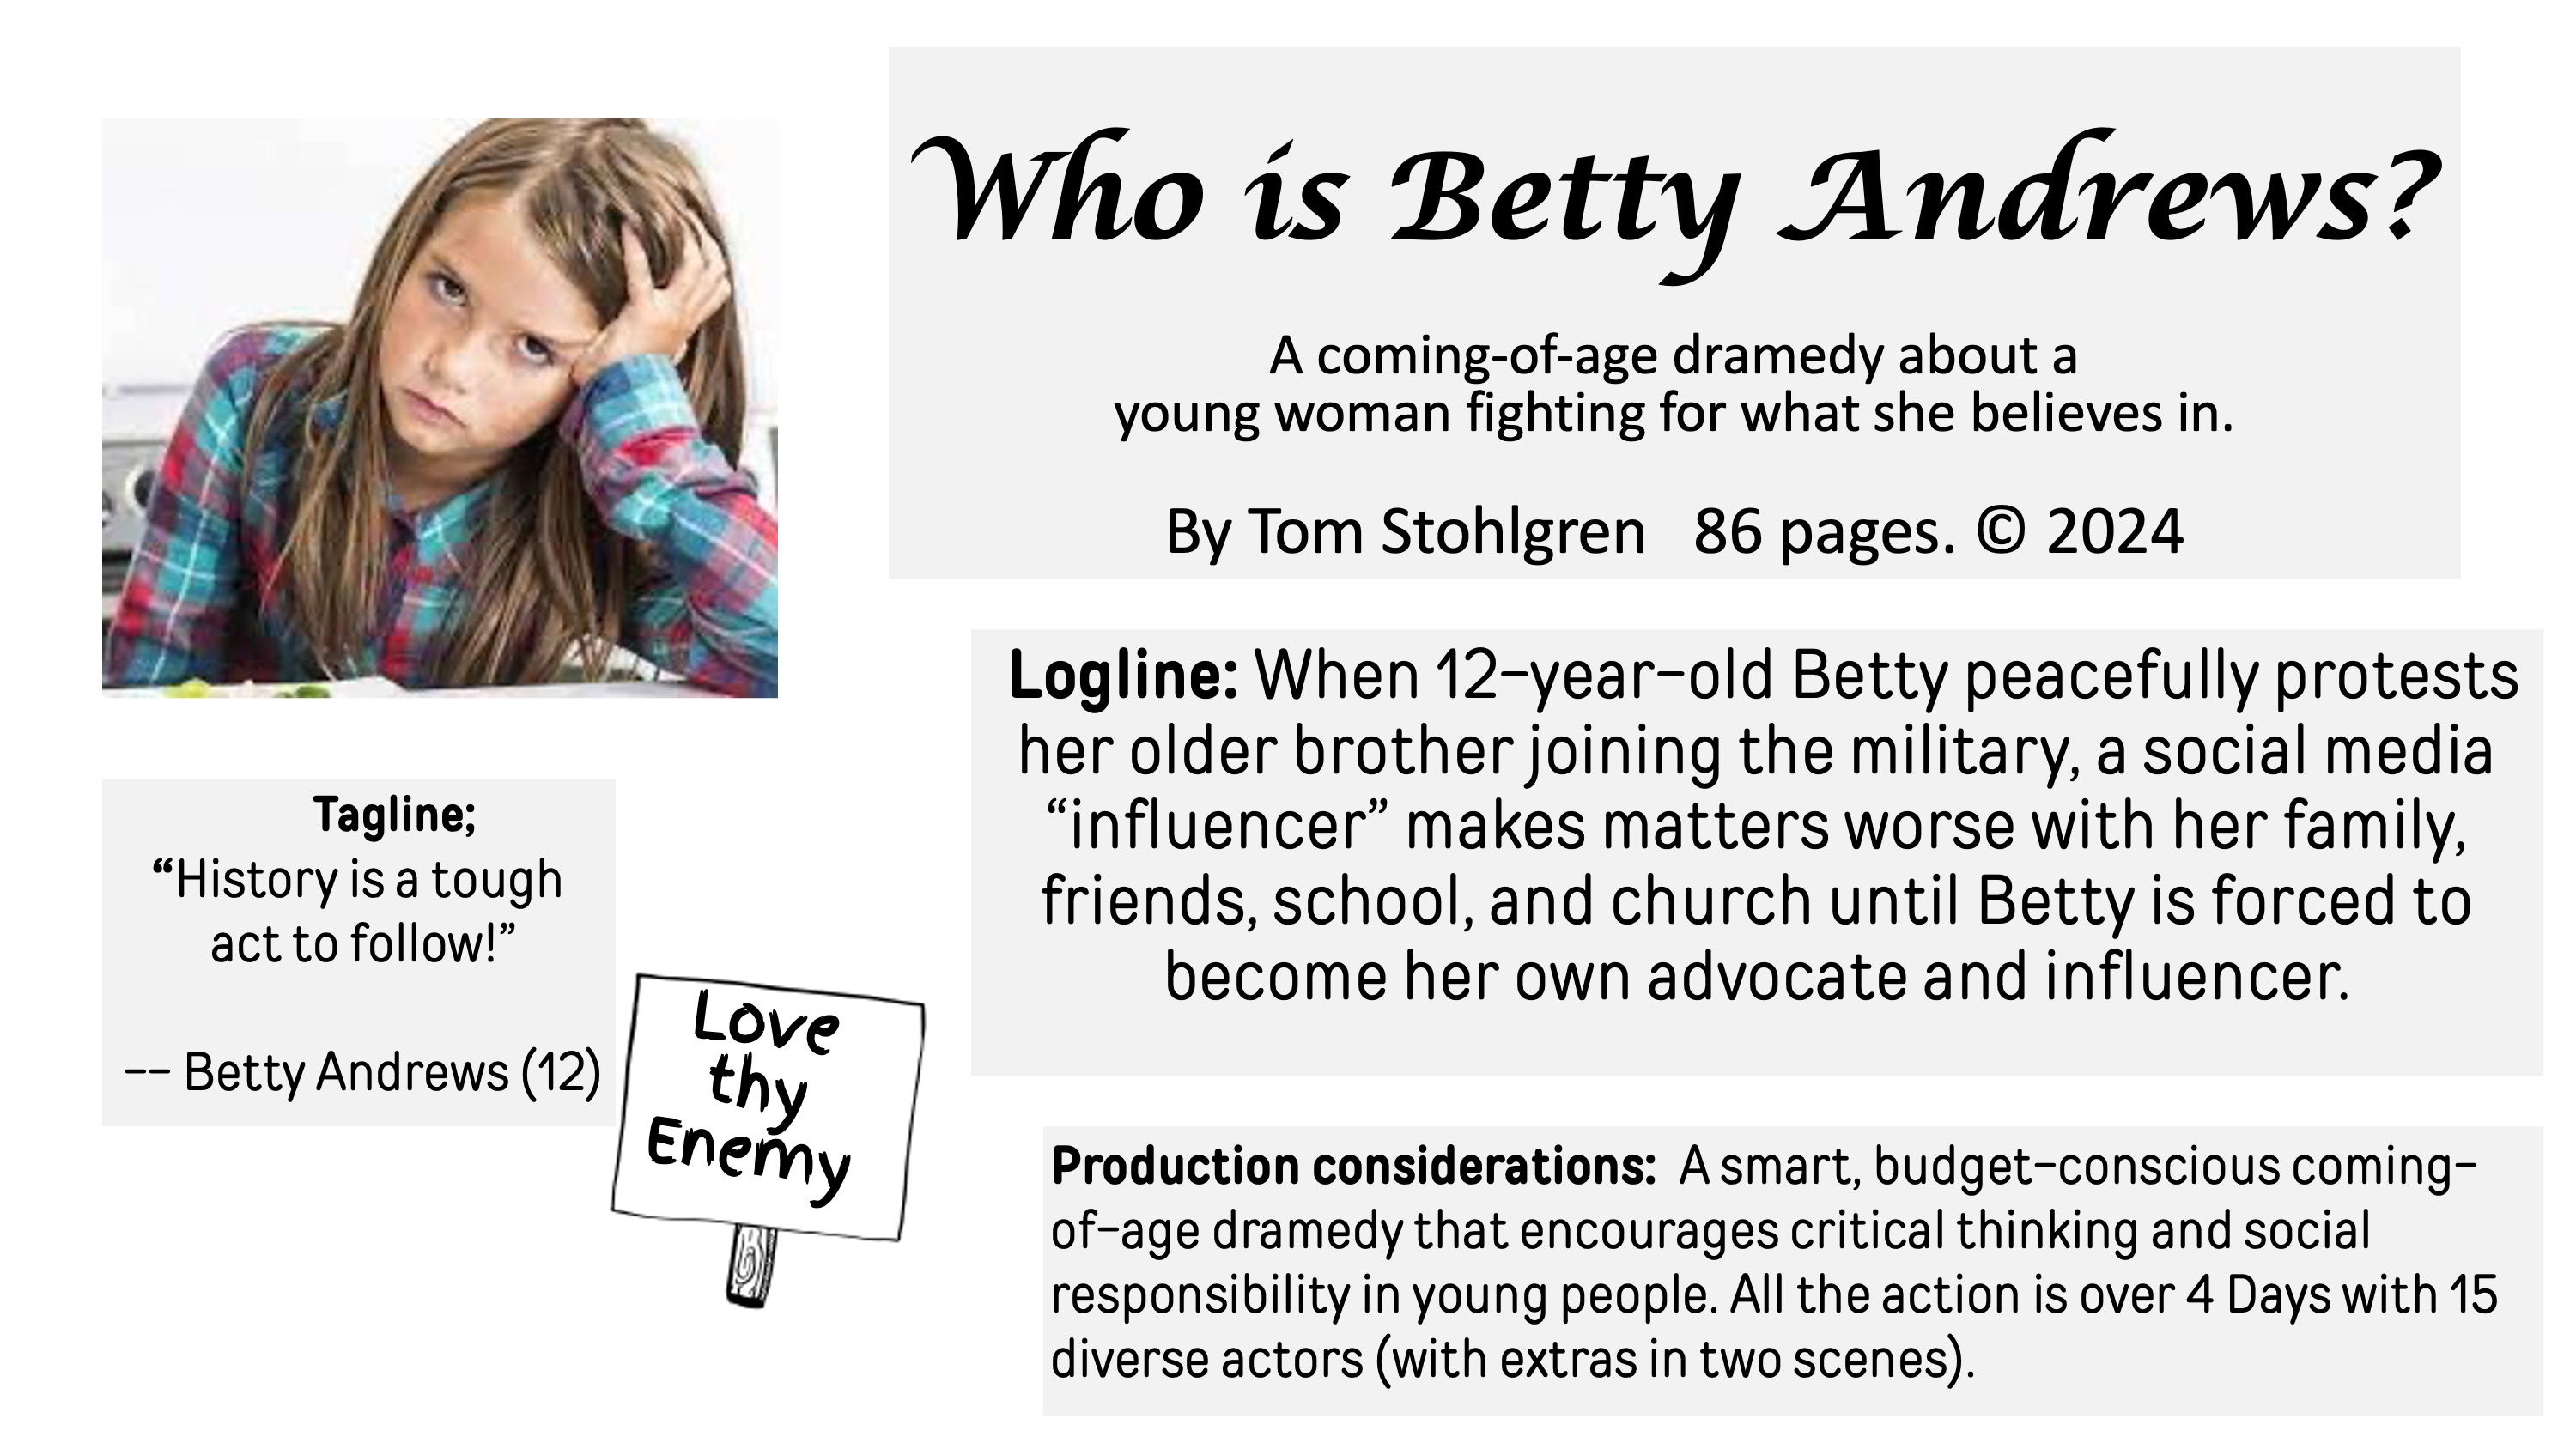 WHO IS BETTY ANDREWS?